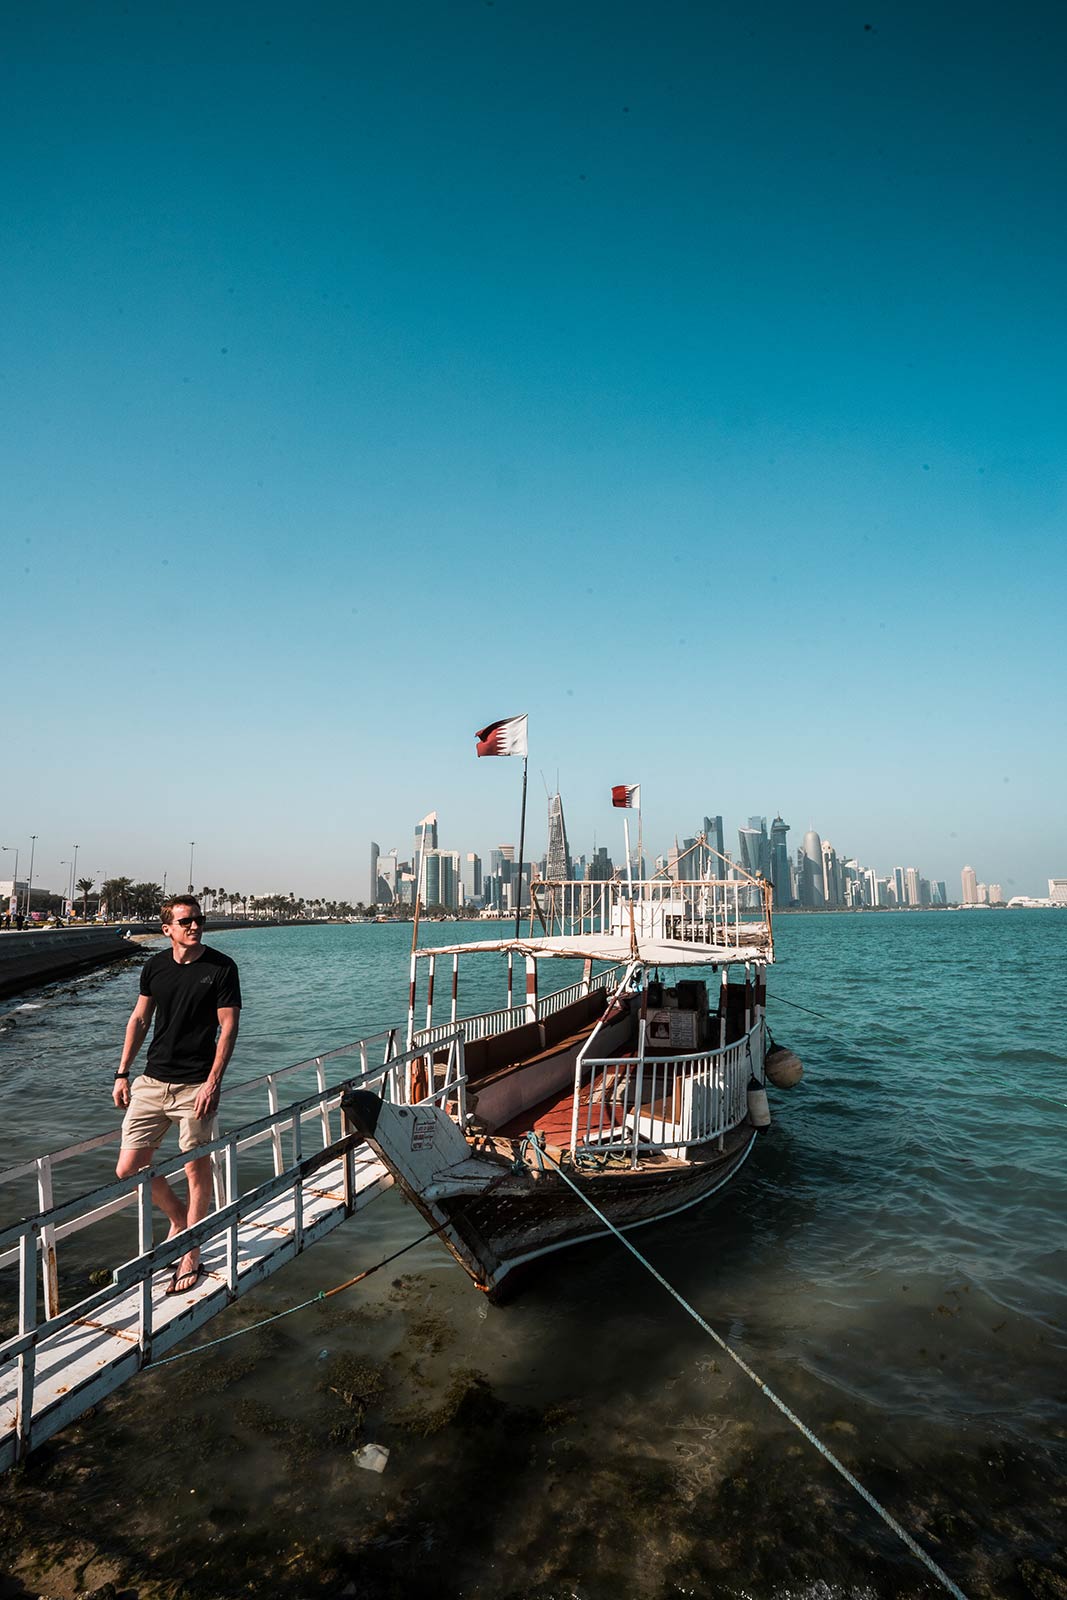 David Simpson and traditional dhow wooden boat at Corniche Marina in Doha, Qatar. Swimming in Doha Airport